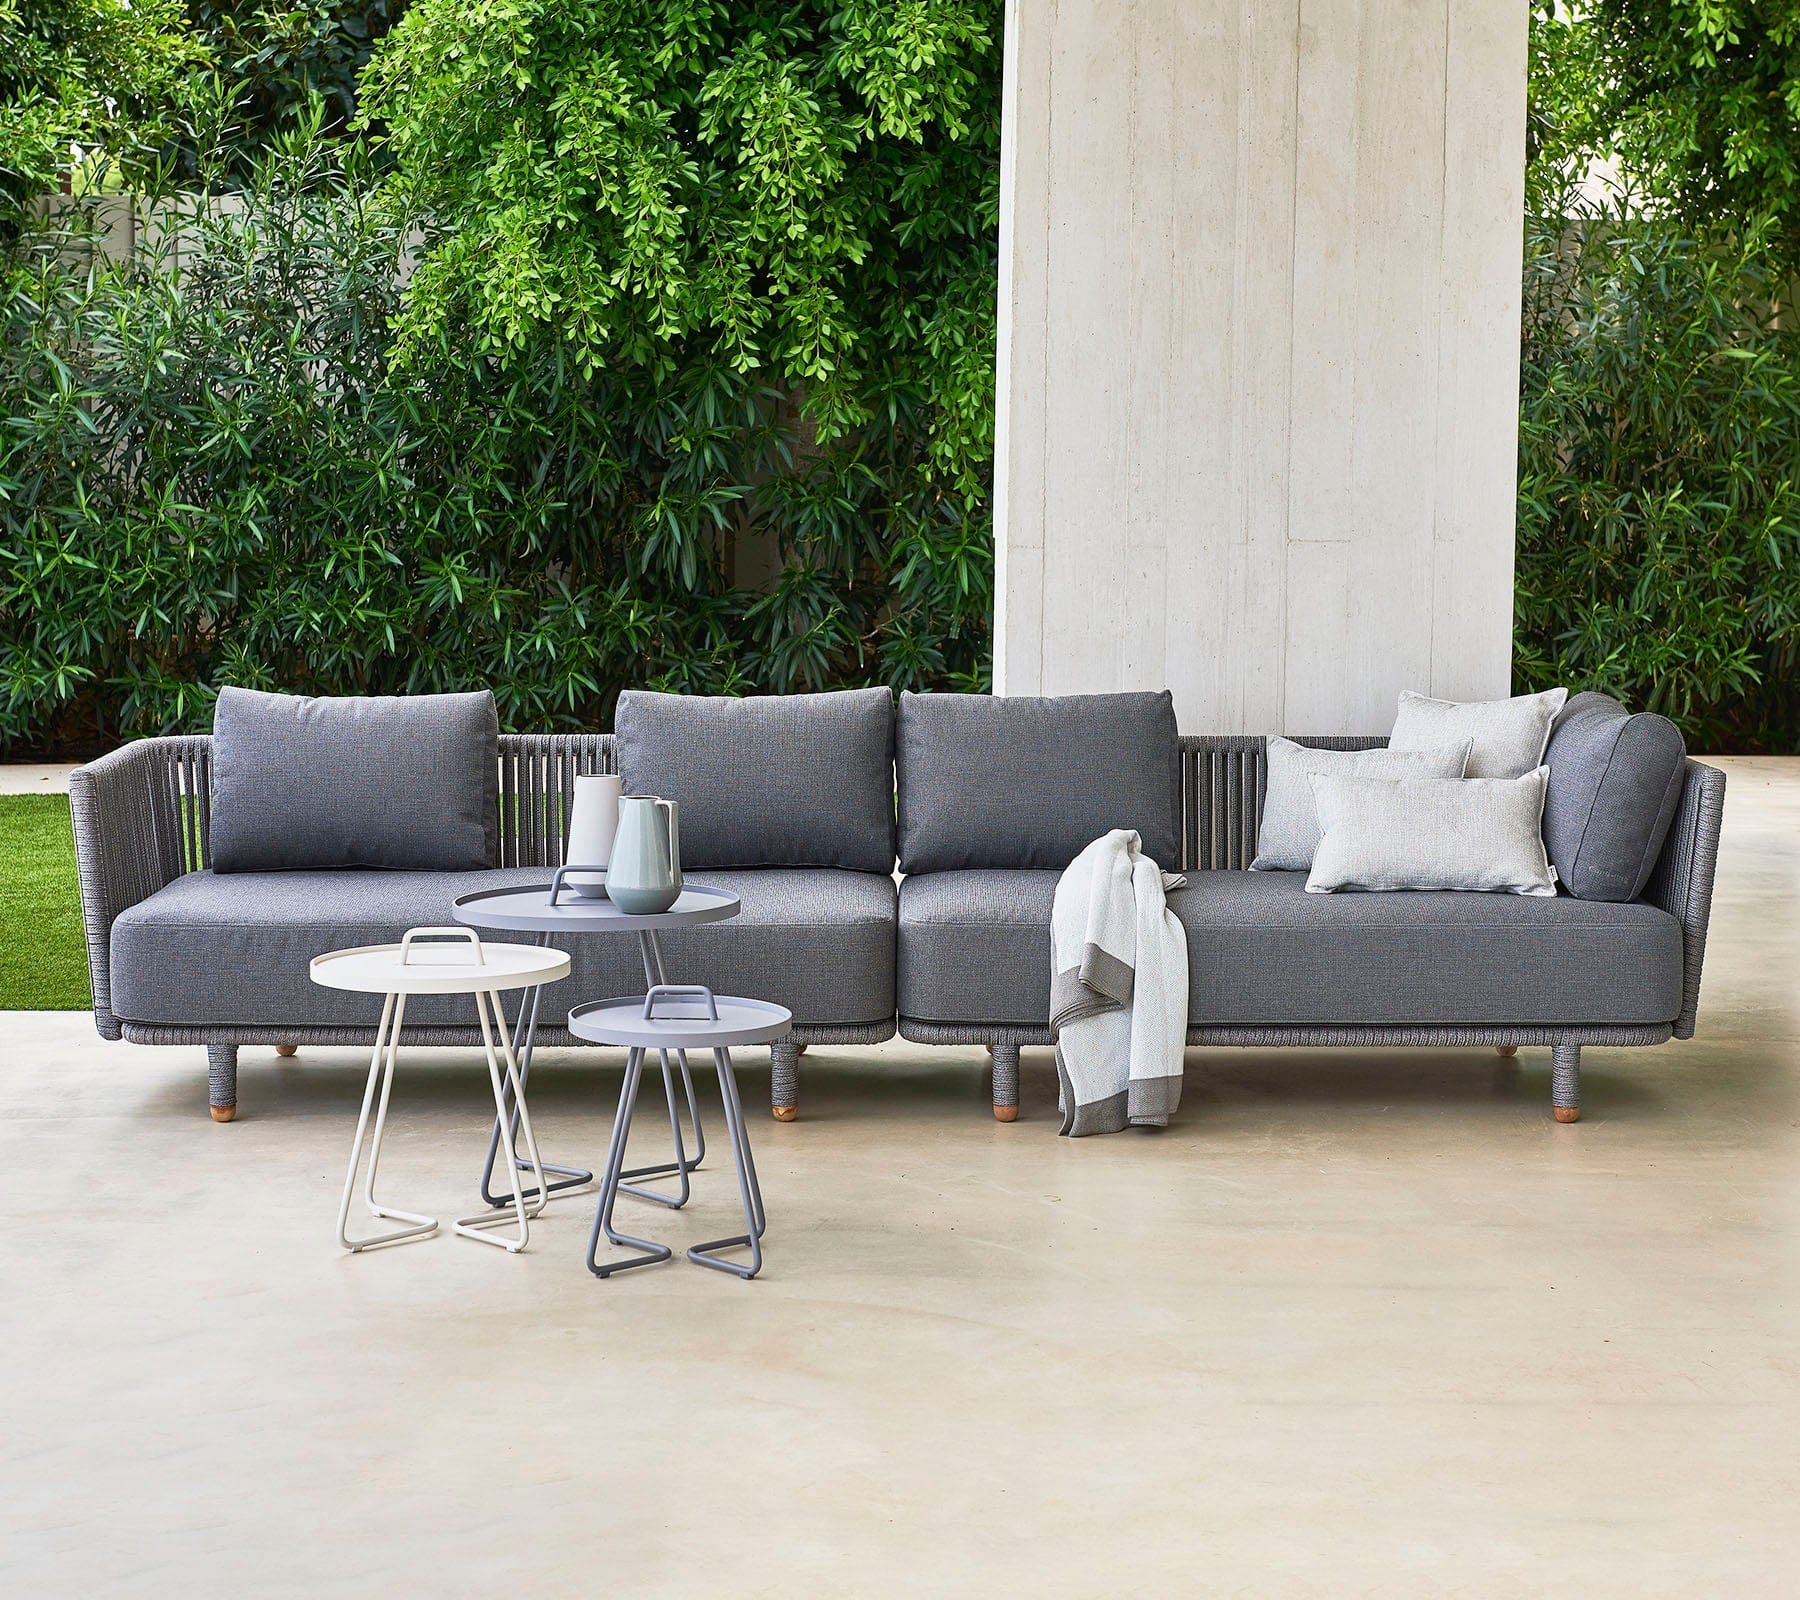 Boxhill's Moments 2-Seater Left Module Sofa lifestyle image with Moments 2-Seater Right Module Sofa and 3 round table at patio